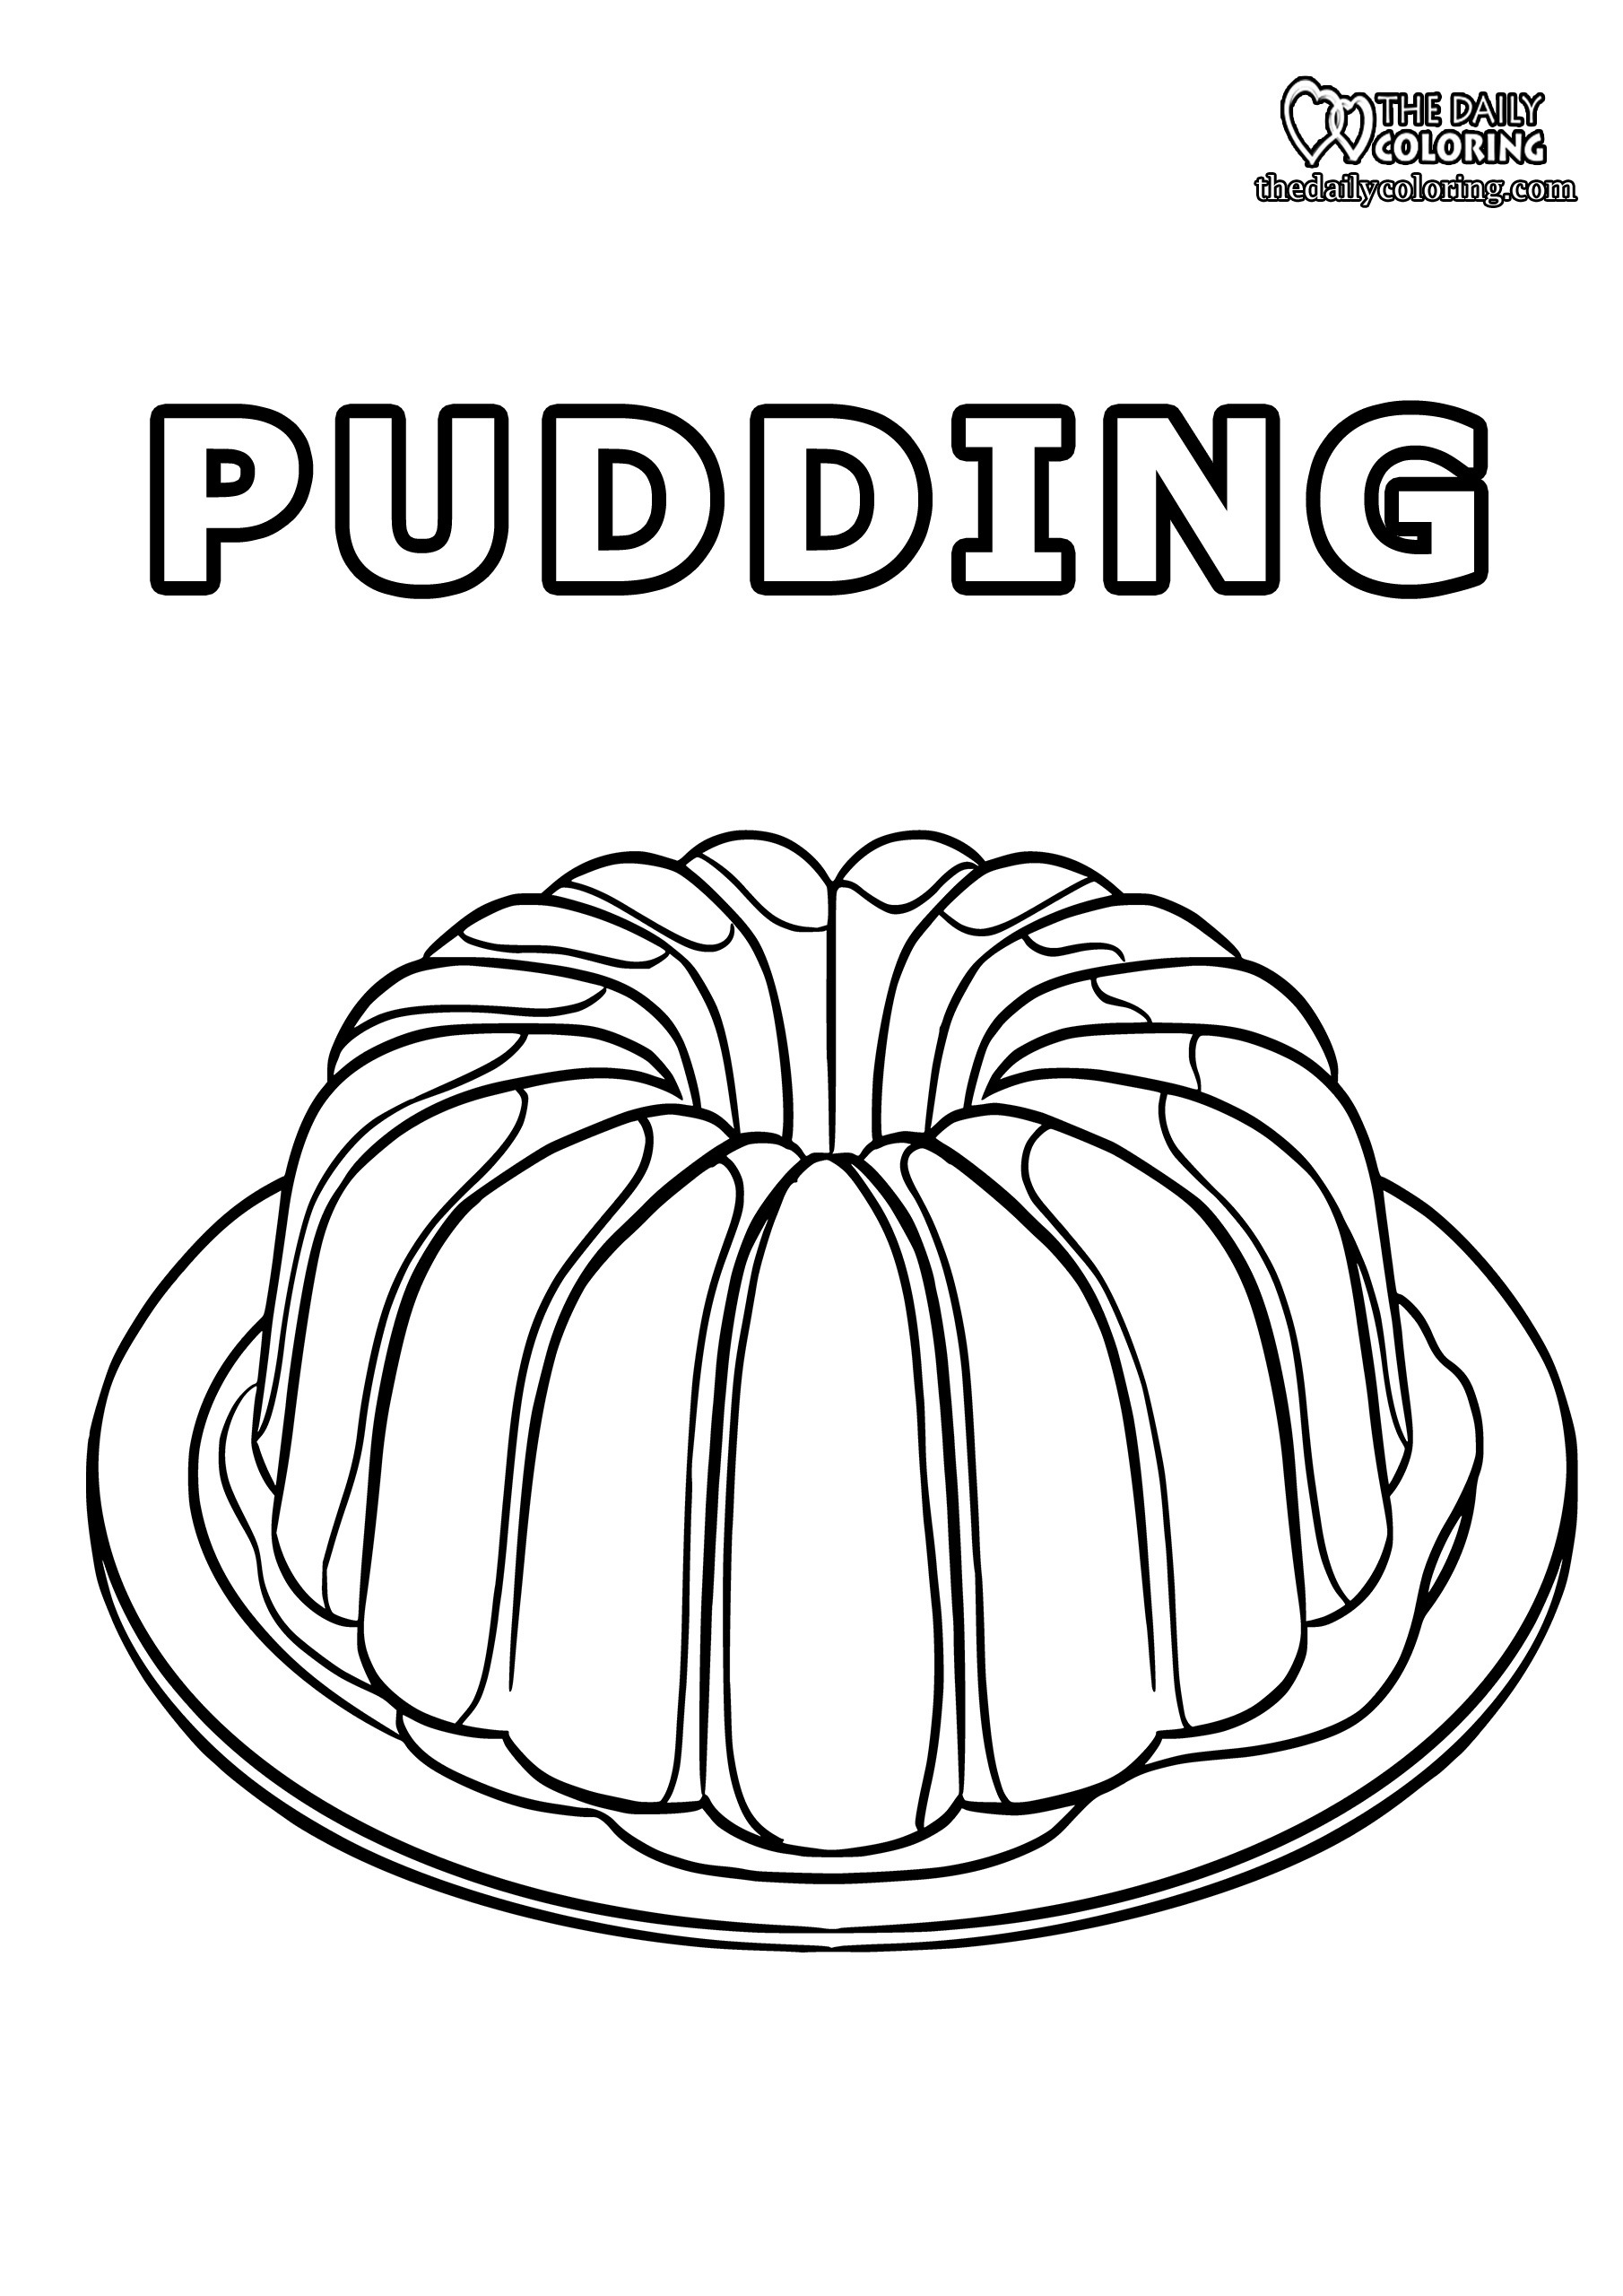 Preschool Bakery Coloring Pages - The Daily Coloring